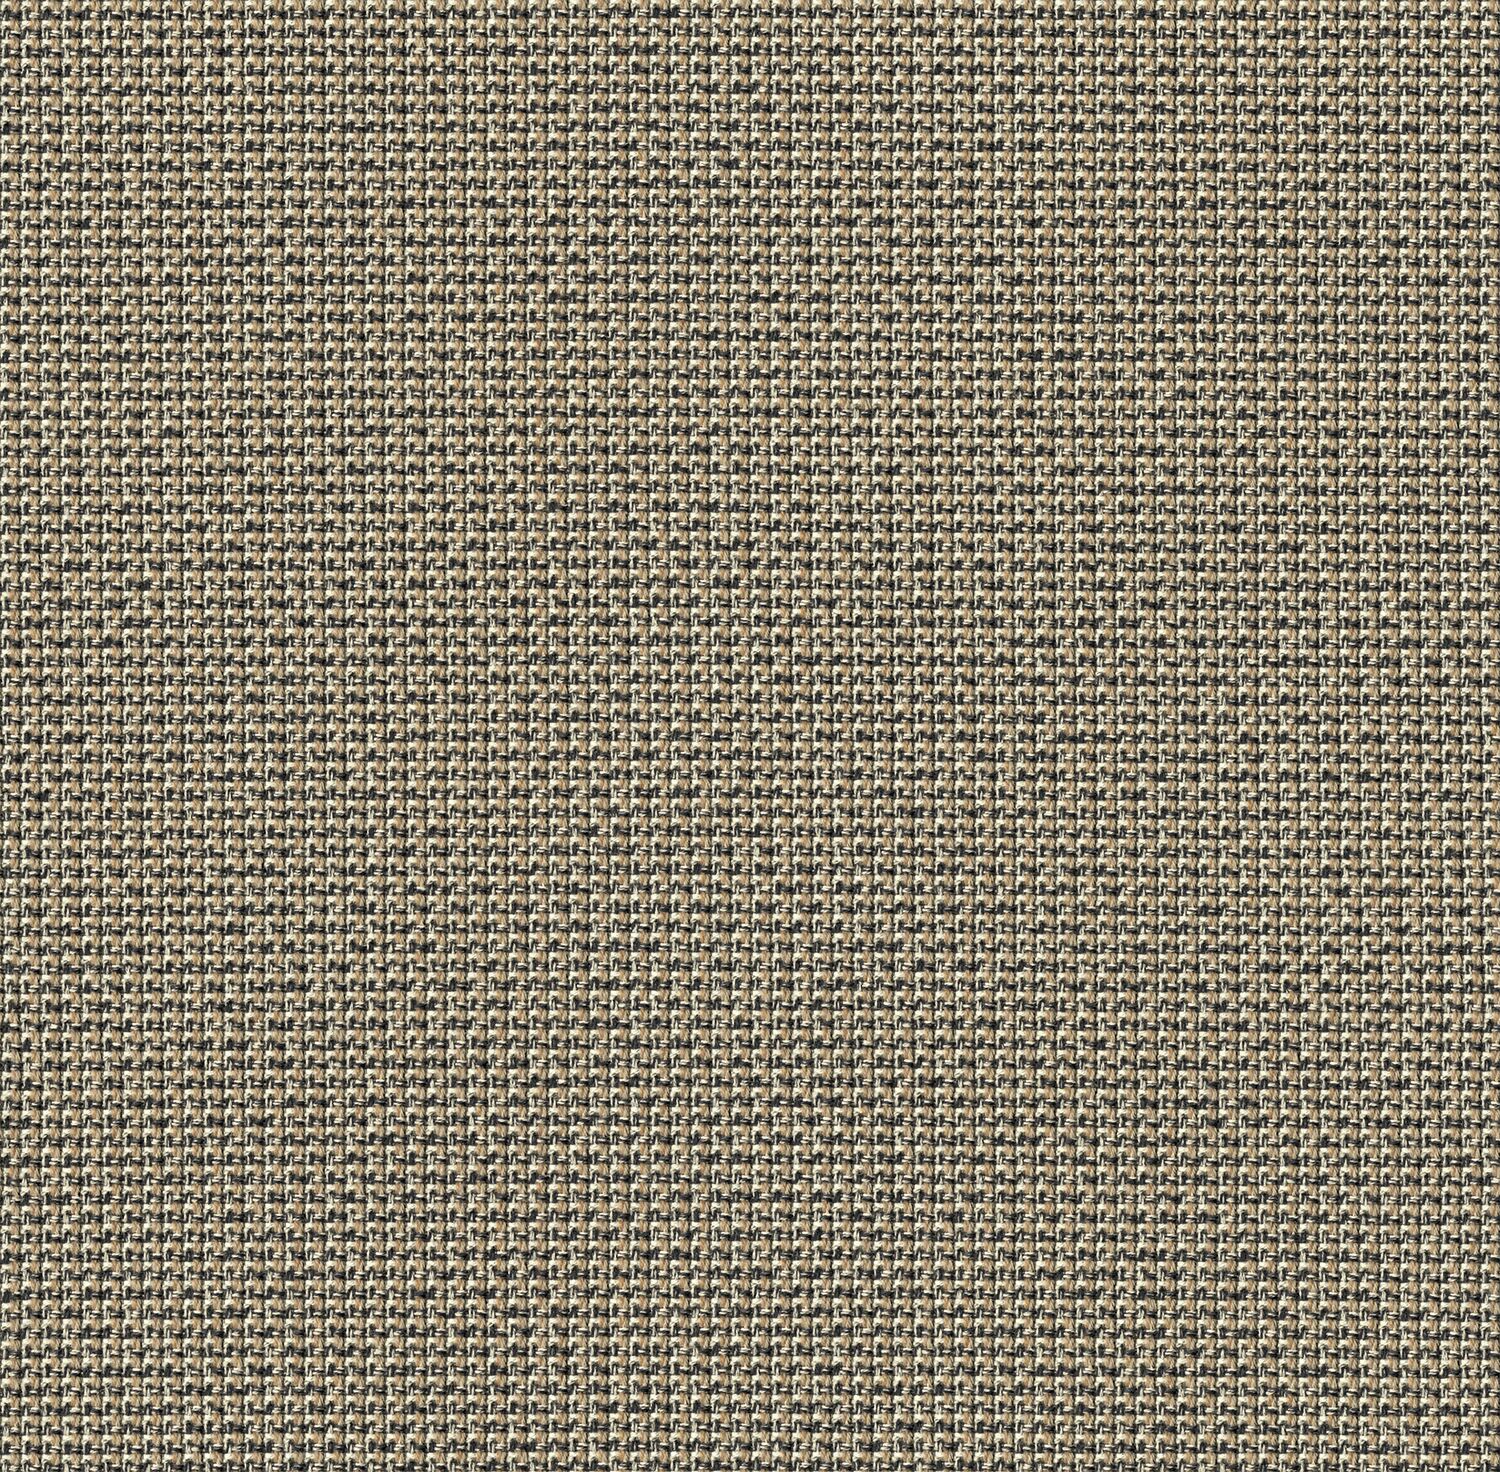 Barberpole Basket - Braided Rope - 4114 - 06 Tileable Swatches